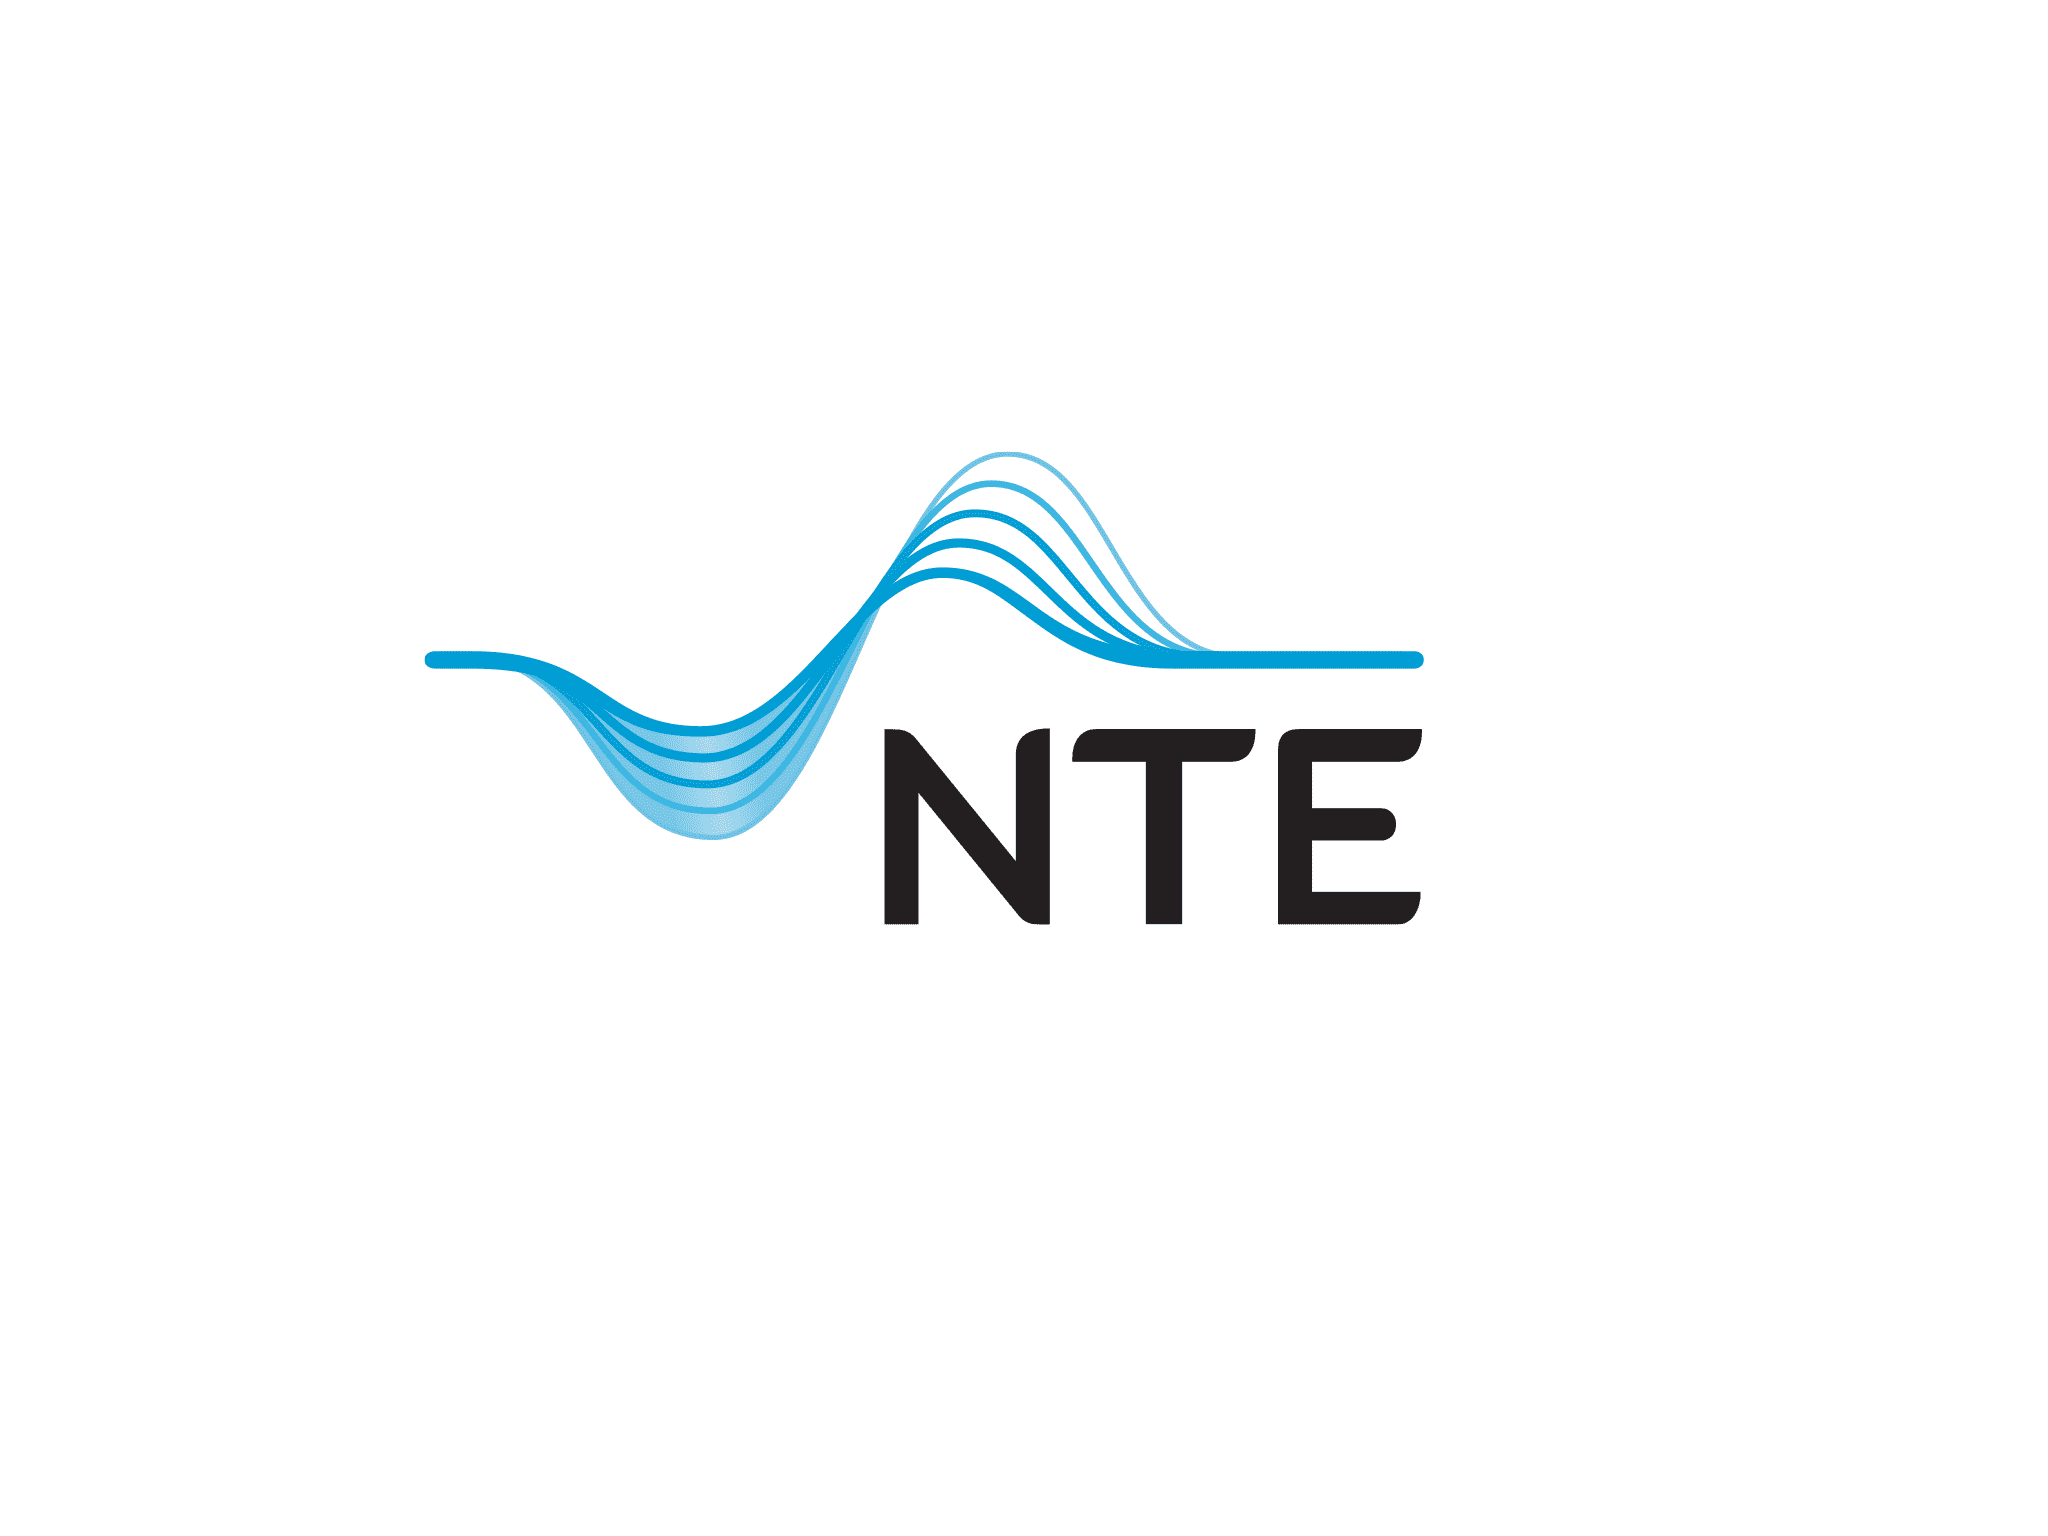 NTE - The largest renewable energy producer in northern Norway.